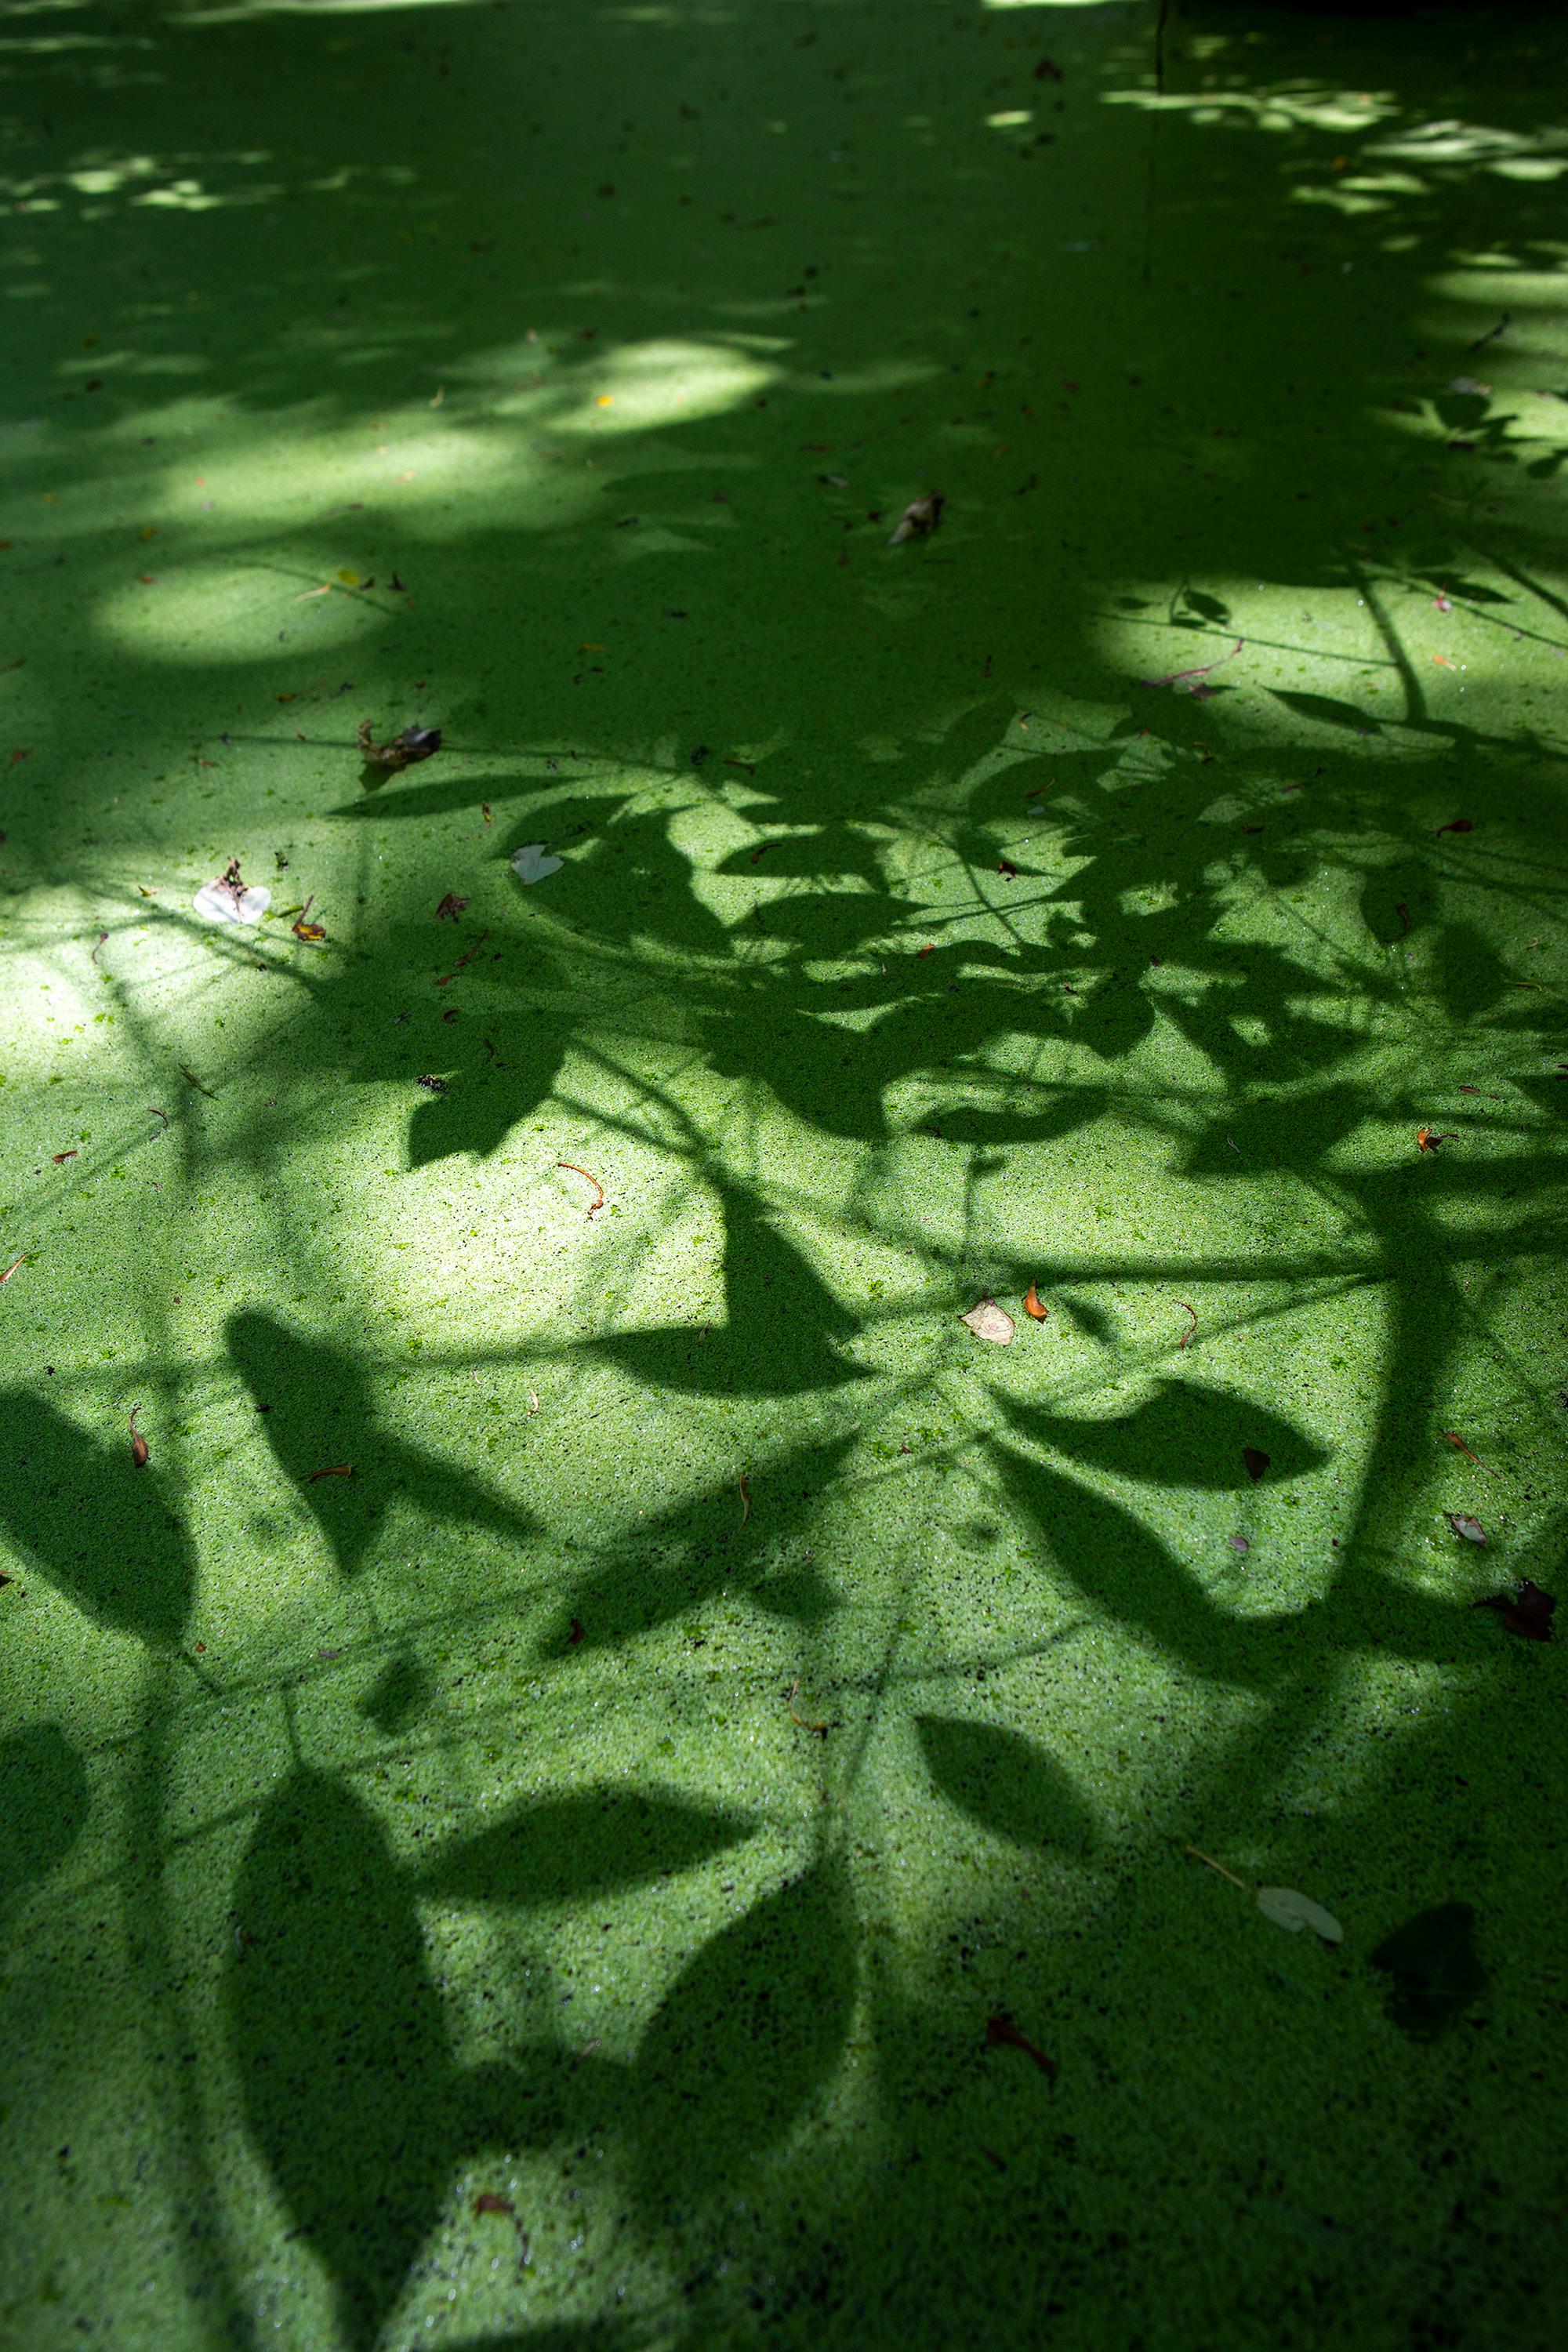 Keyholes of Light No. 23 - swamp - water - southern photography - cypress - Photograph by Cecilia Montalvo & Charlie McCullers